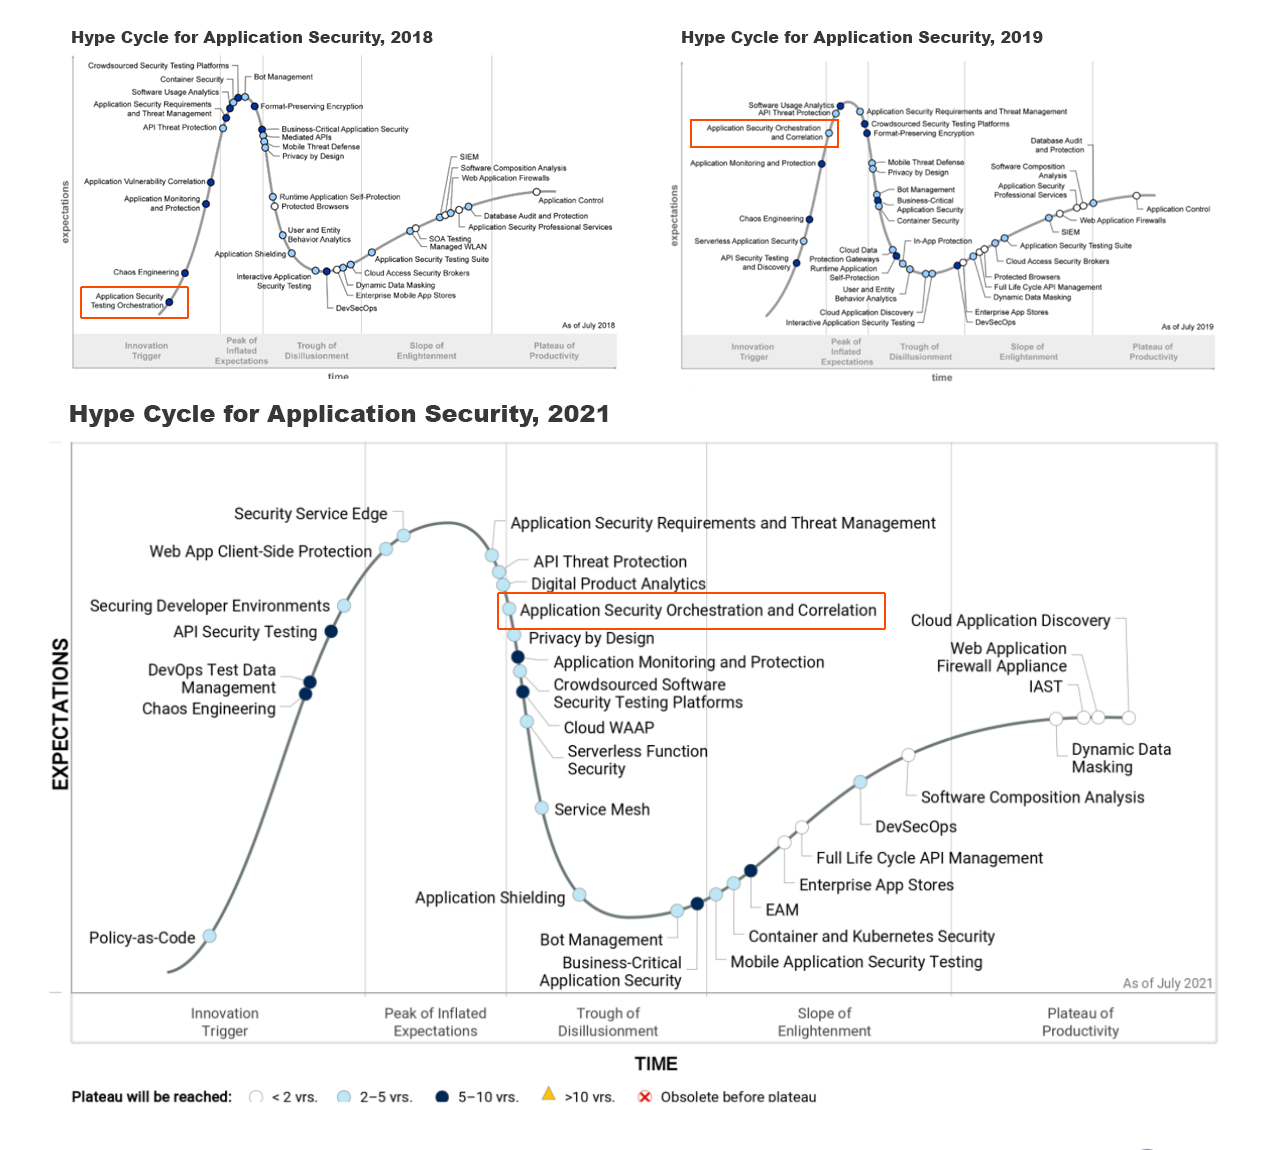 Gartner Hype Cycle for Application Security 2018-2021